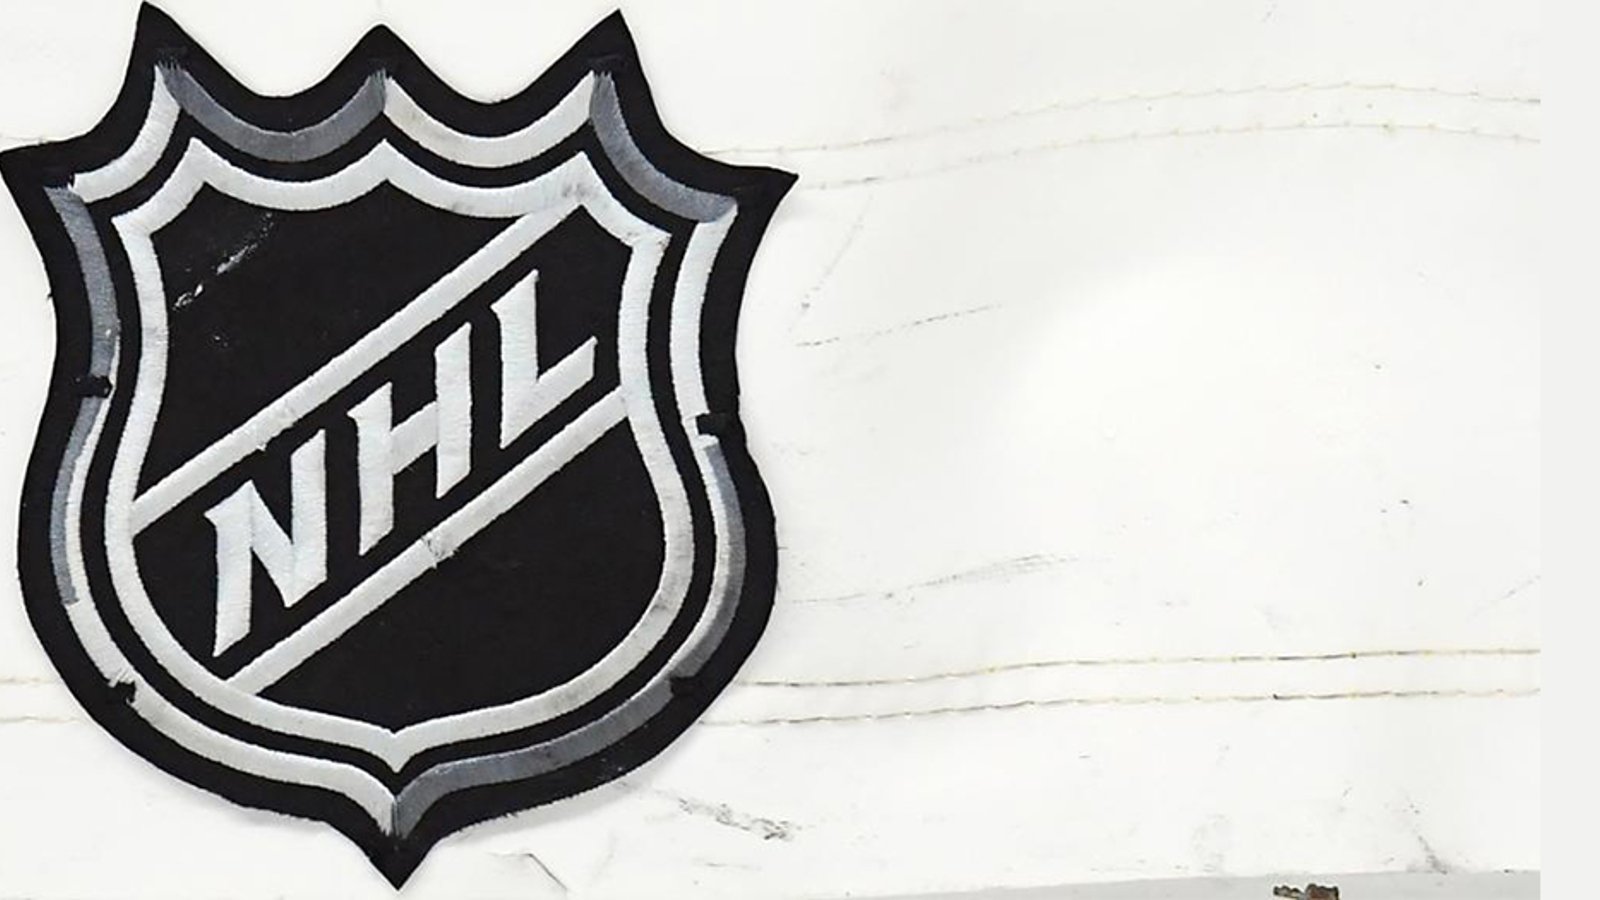 NHL hopes to run “training camp period” starting April 29th